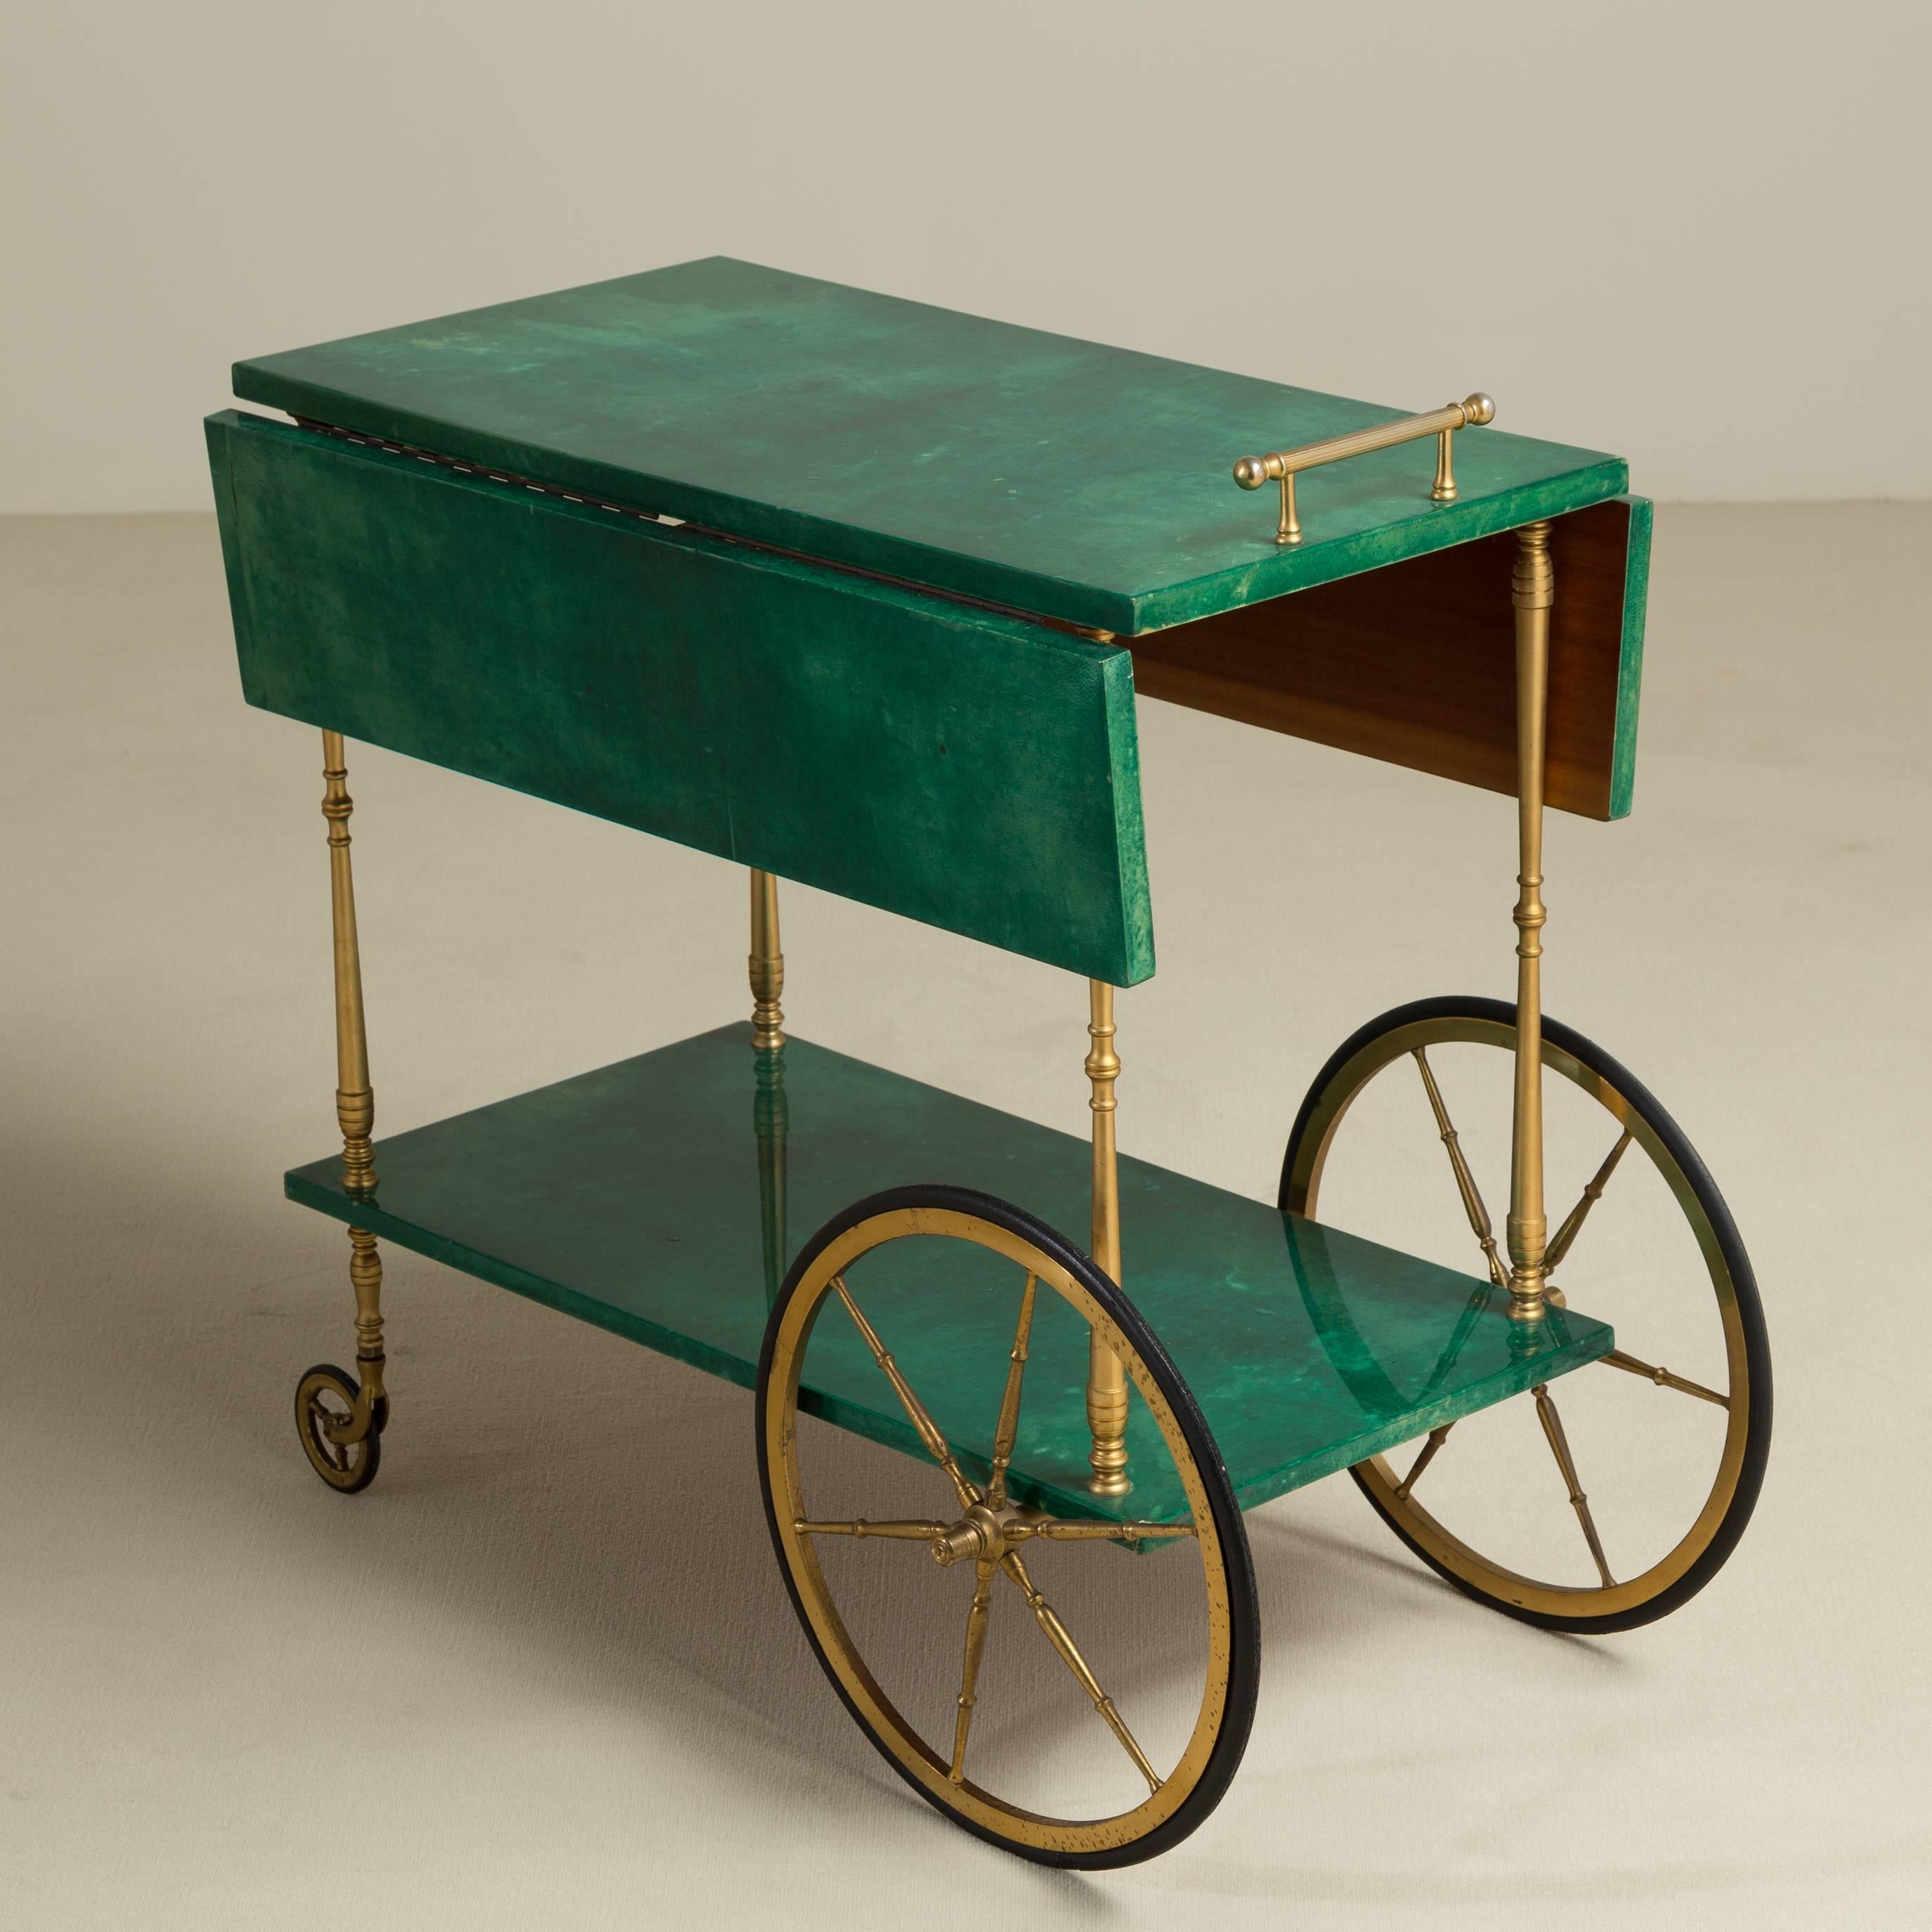 A rare two-tiered drop-leaf emereld green lacquered goatskin barcart designed by Aldo Tura with original brass metalwork, Italy, 1950s, stamped.

Prices include 20% VAT which is removed for items shipped outside the EU.